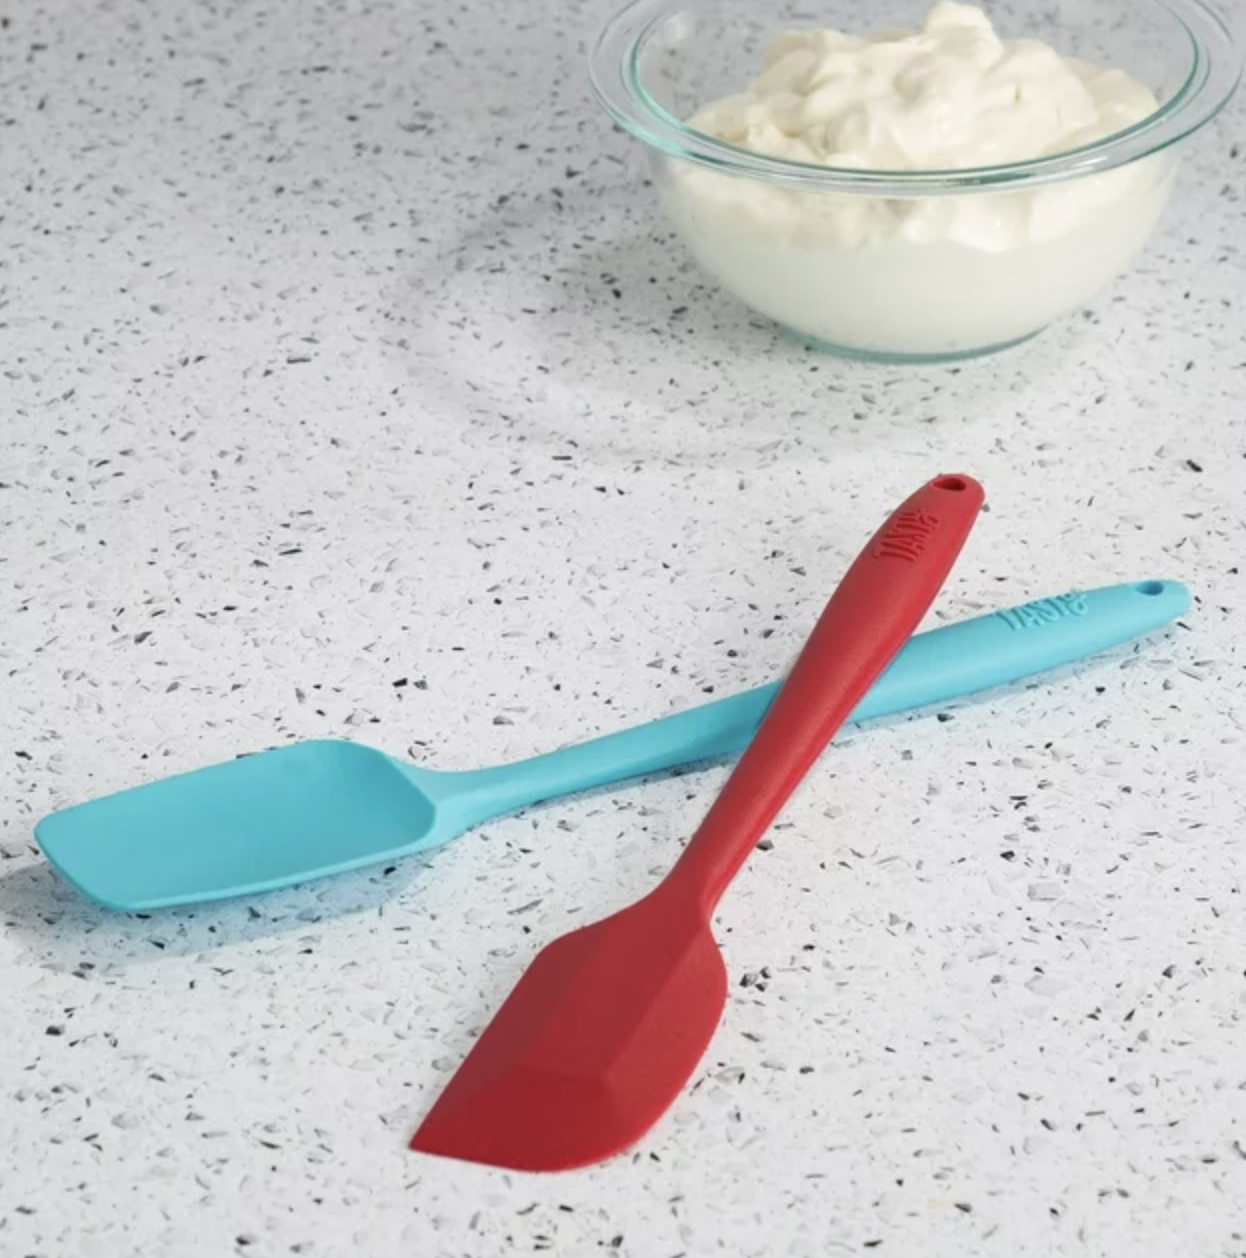 The red and blue spatula on countertop next to bowl of whipped cream